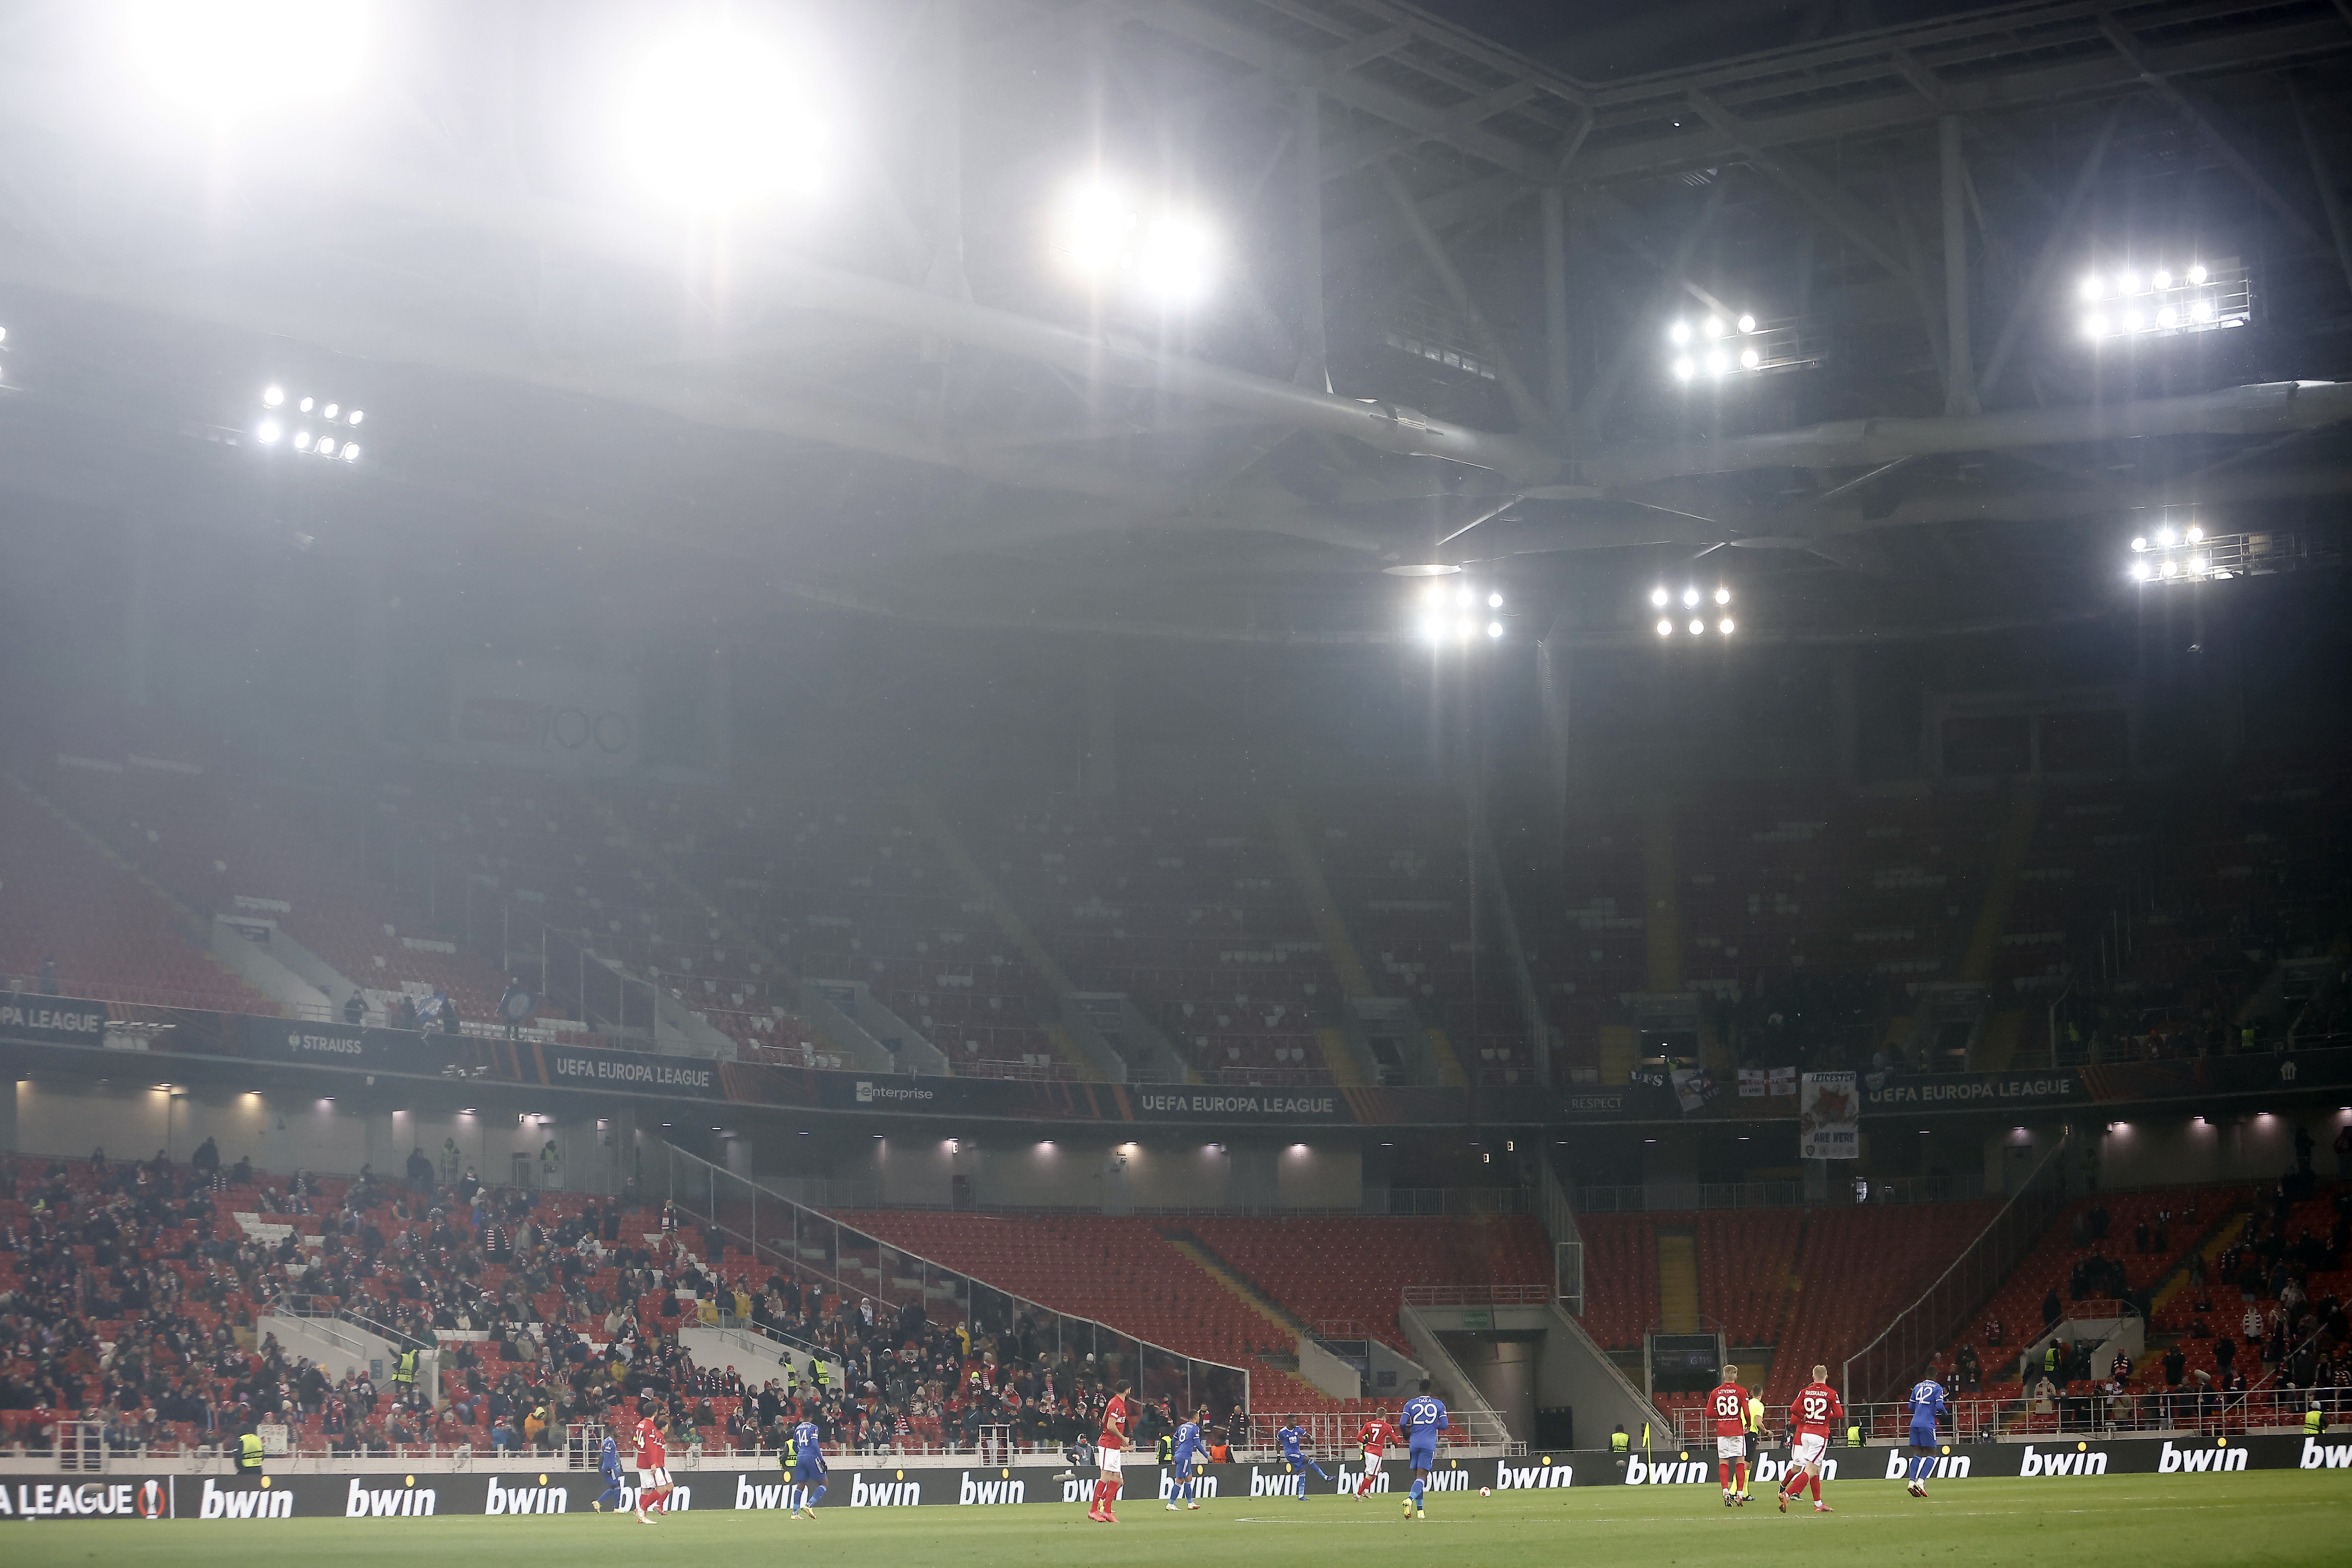 FC Spartak (Moscow) Team Fans in Action Editorial Photo - Image of